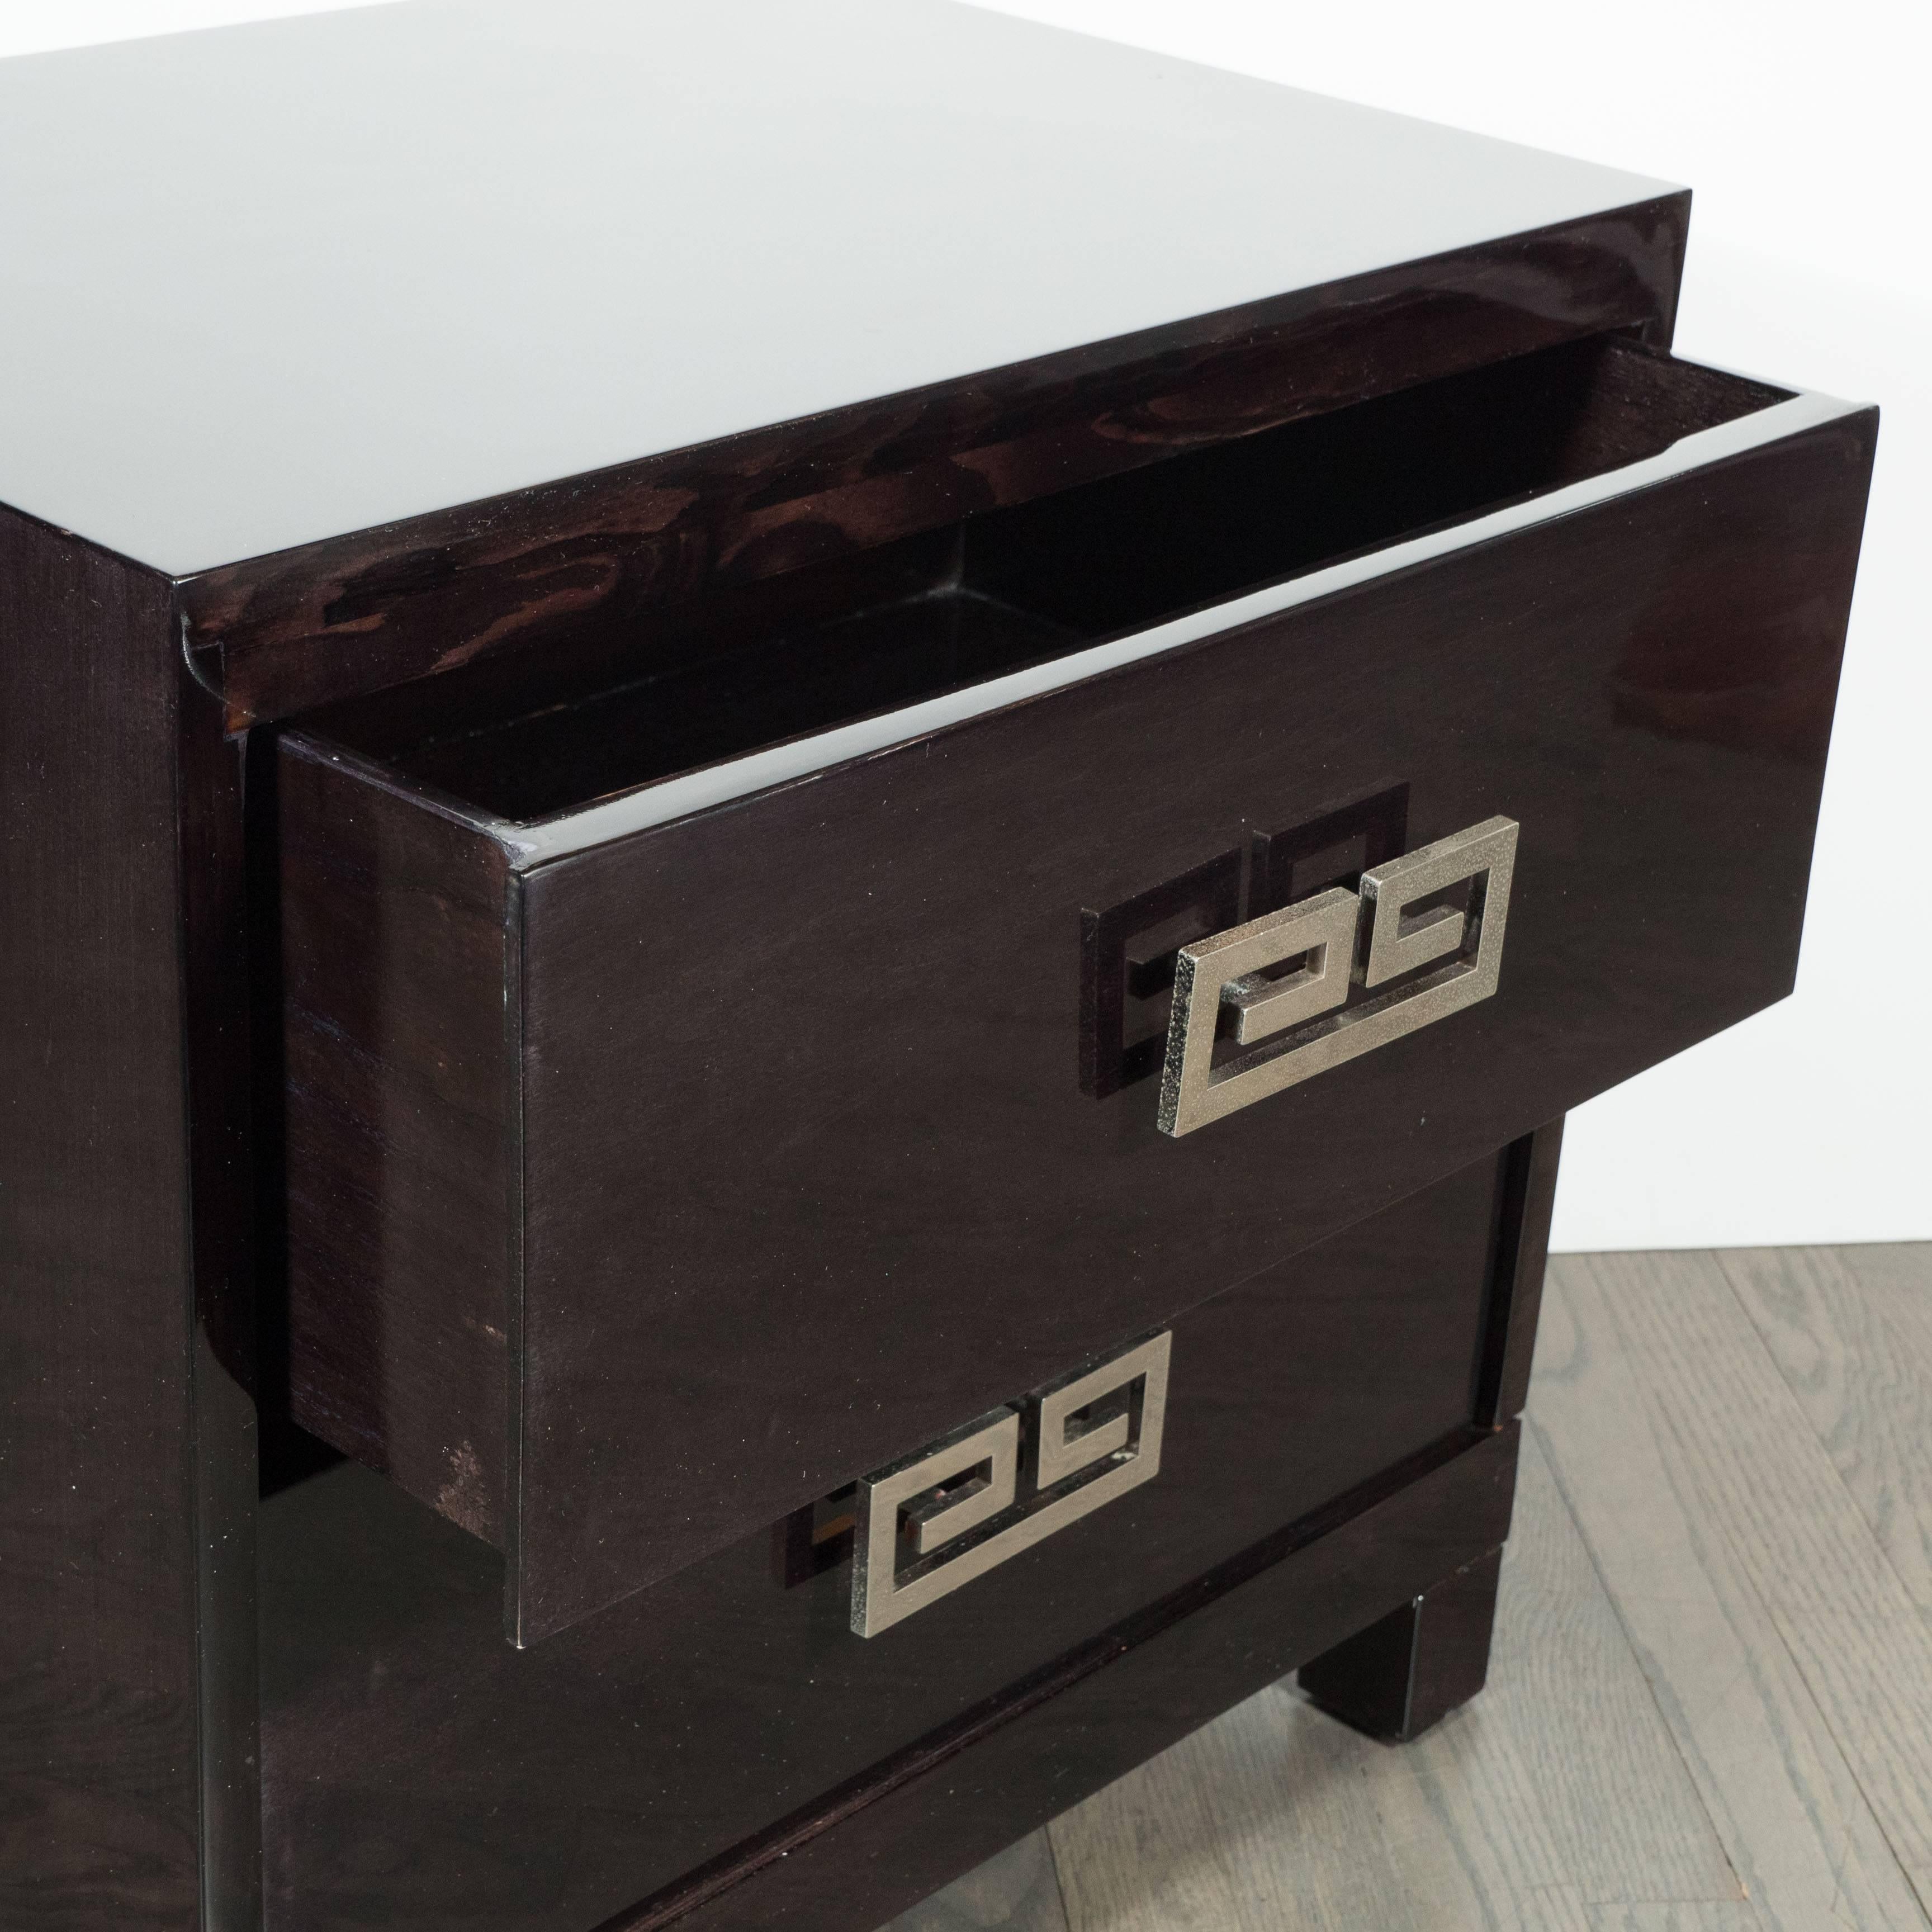 This stunning pair of Mid-Century end tables or nightstands were realized in the United States, circa 1950. They feature rectilinear bodies and volumetric square feet in hand-rubbed ebonized walnut fitted with two drawers each. They offer polished